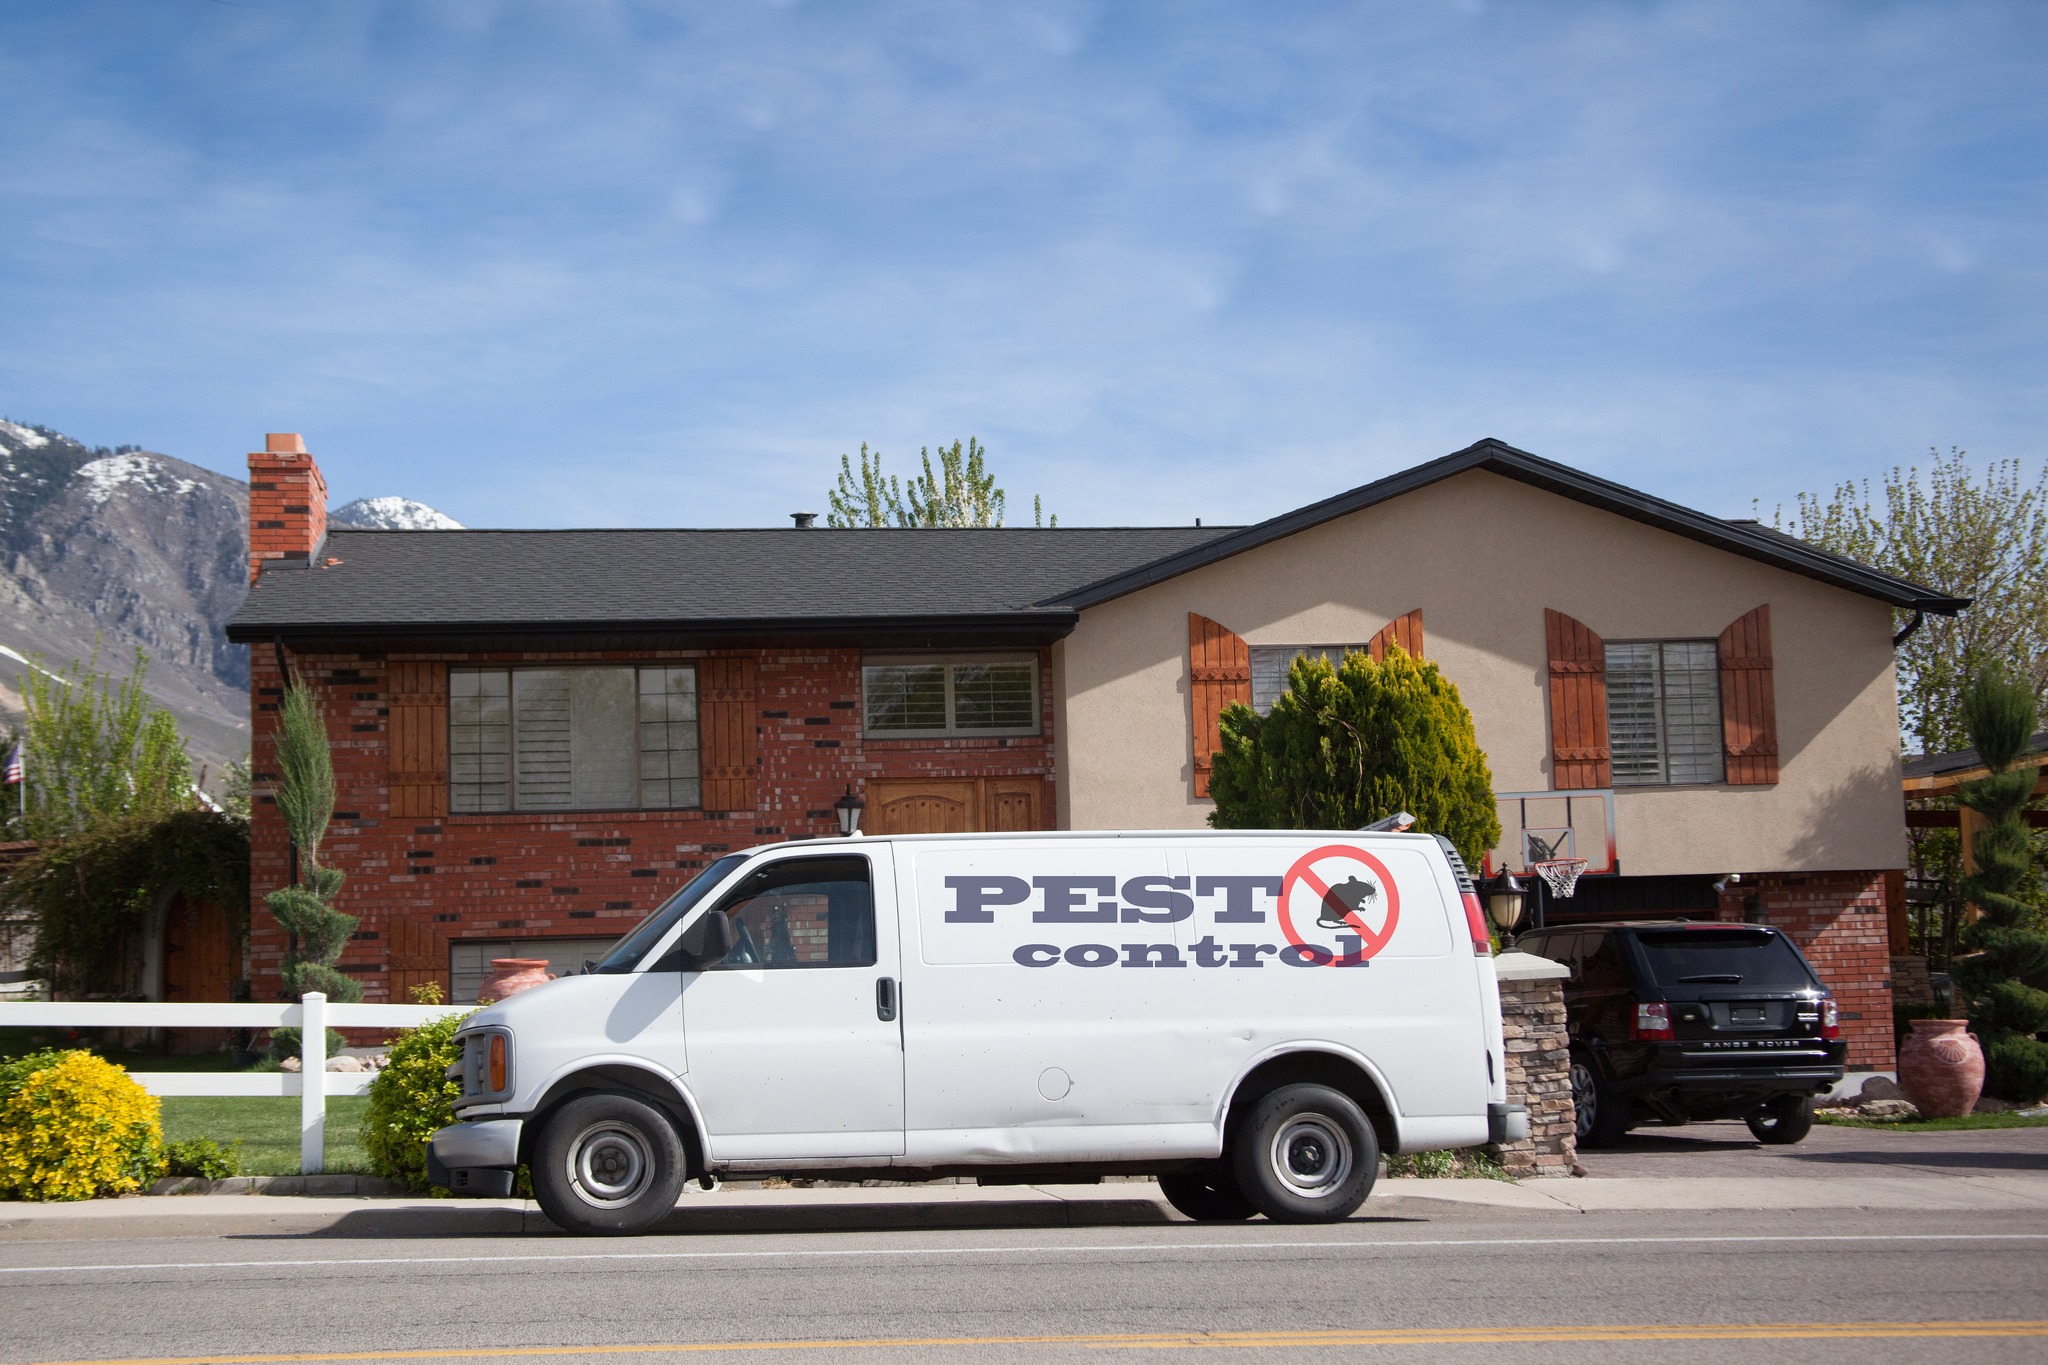 Bakersfield Pest control expert Quotes